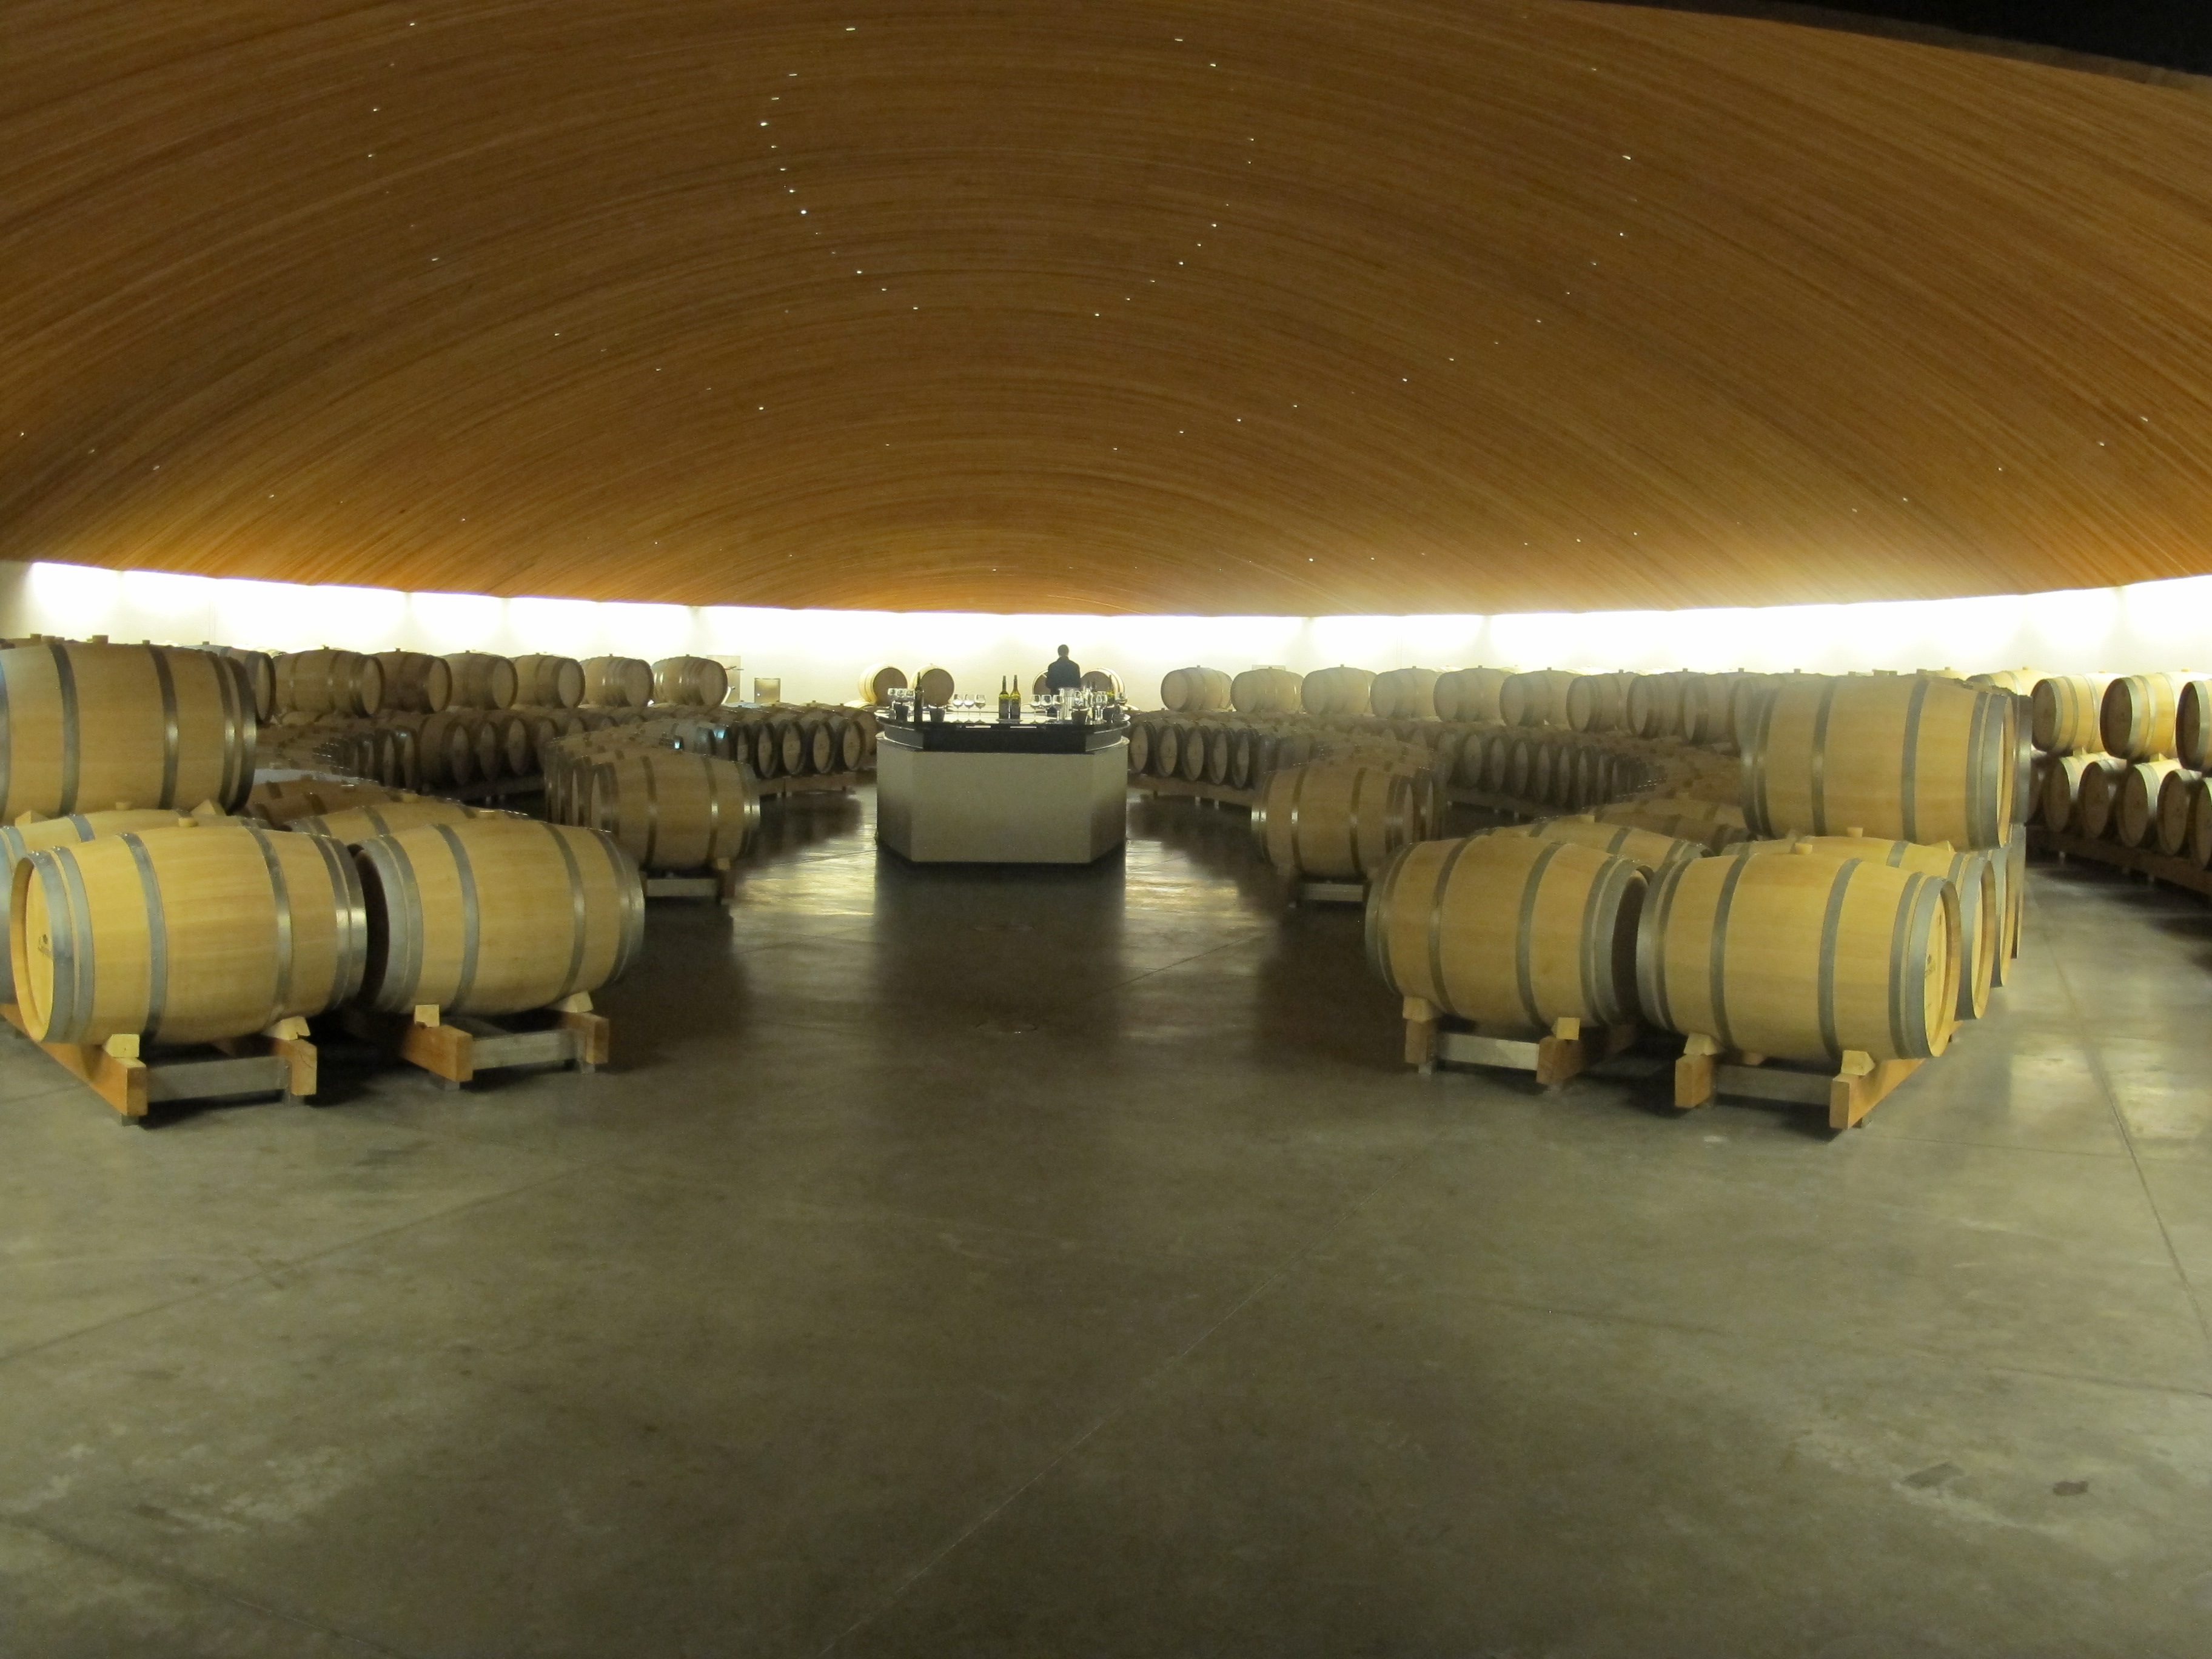 State of the art winery.